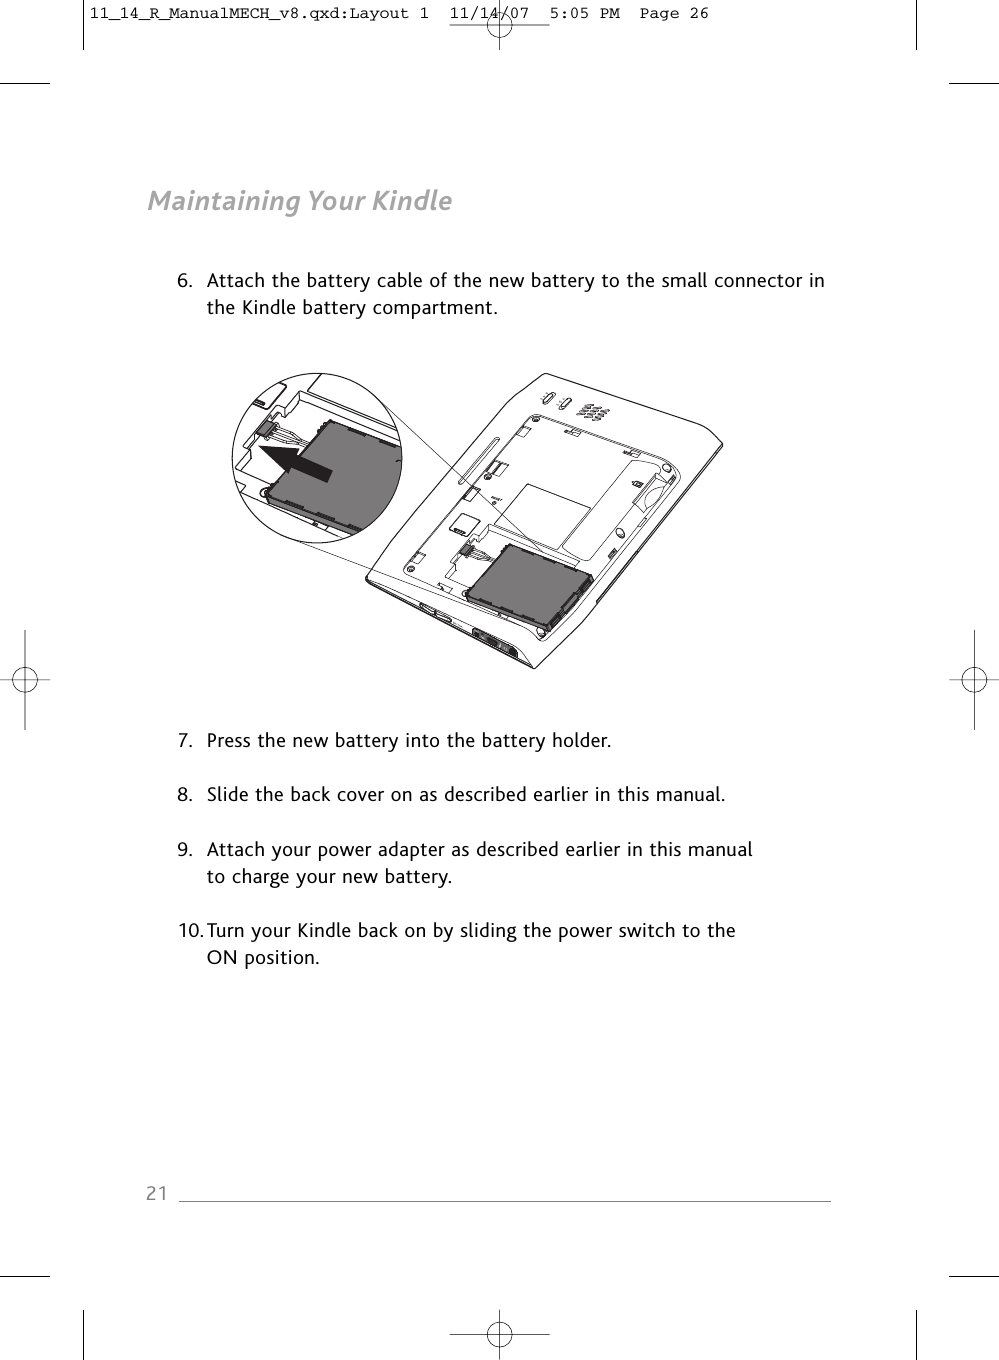 Maintaining Your Kindle6. Attach the battery cable of the new battery to the small connector inthe Kindle battery compartment.7. Press the new battery into the battery holder.8. Slide the back cover on as described earlier in this manual.9. Attach your power adapter as described earlier in this manual to charge your new battery.10.Turn your Kindle back on by sliding the power switch to the ON position.2111_14_R_ManualMECH_v8.qxd:Layout 1  11/14/07  5:05 PM  Page 26